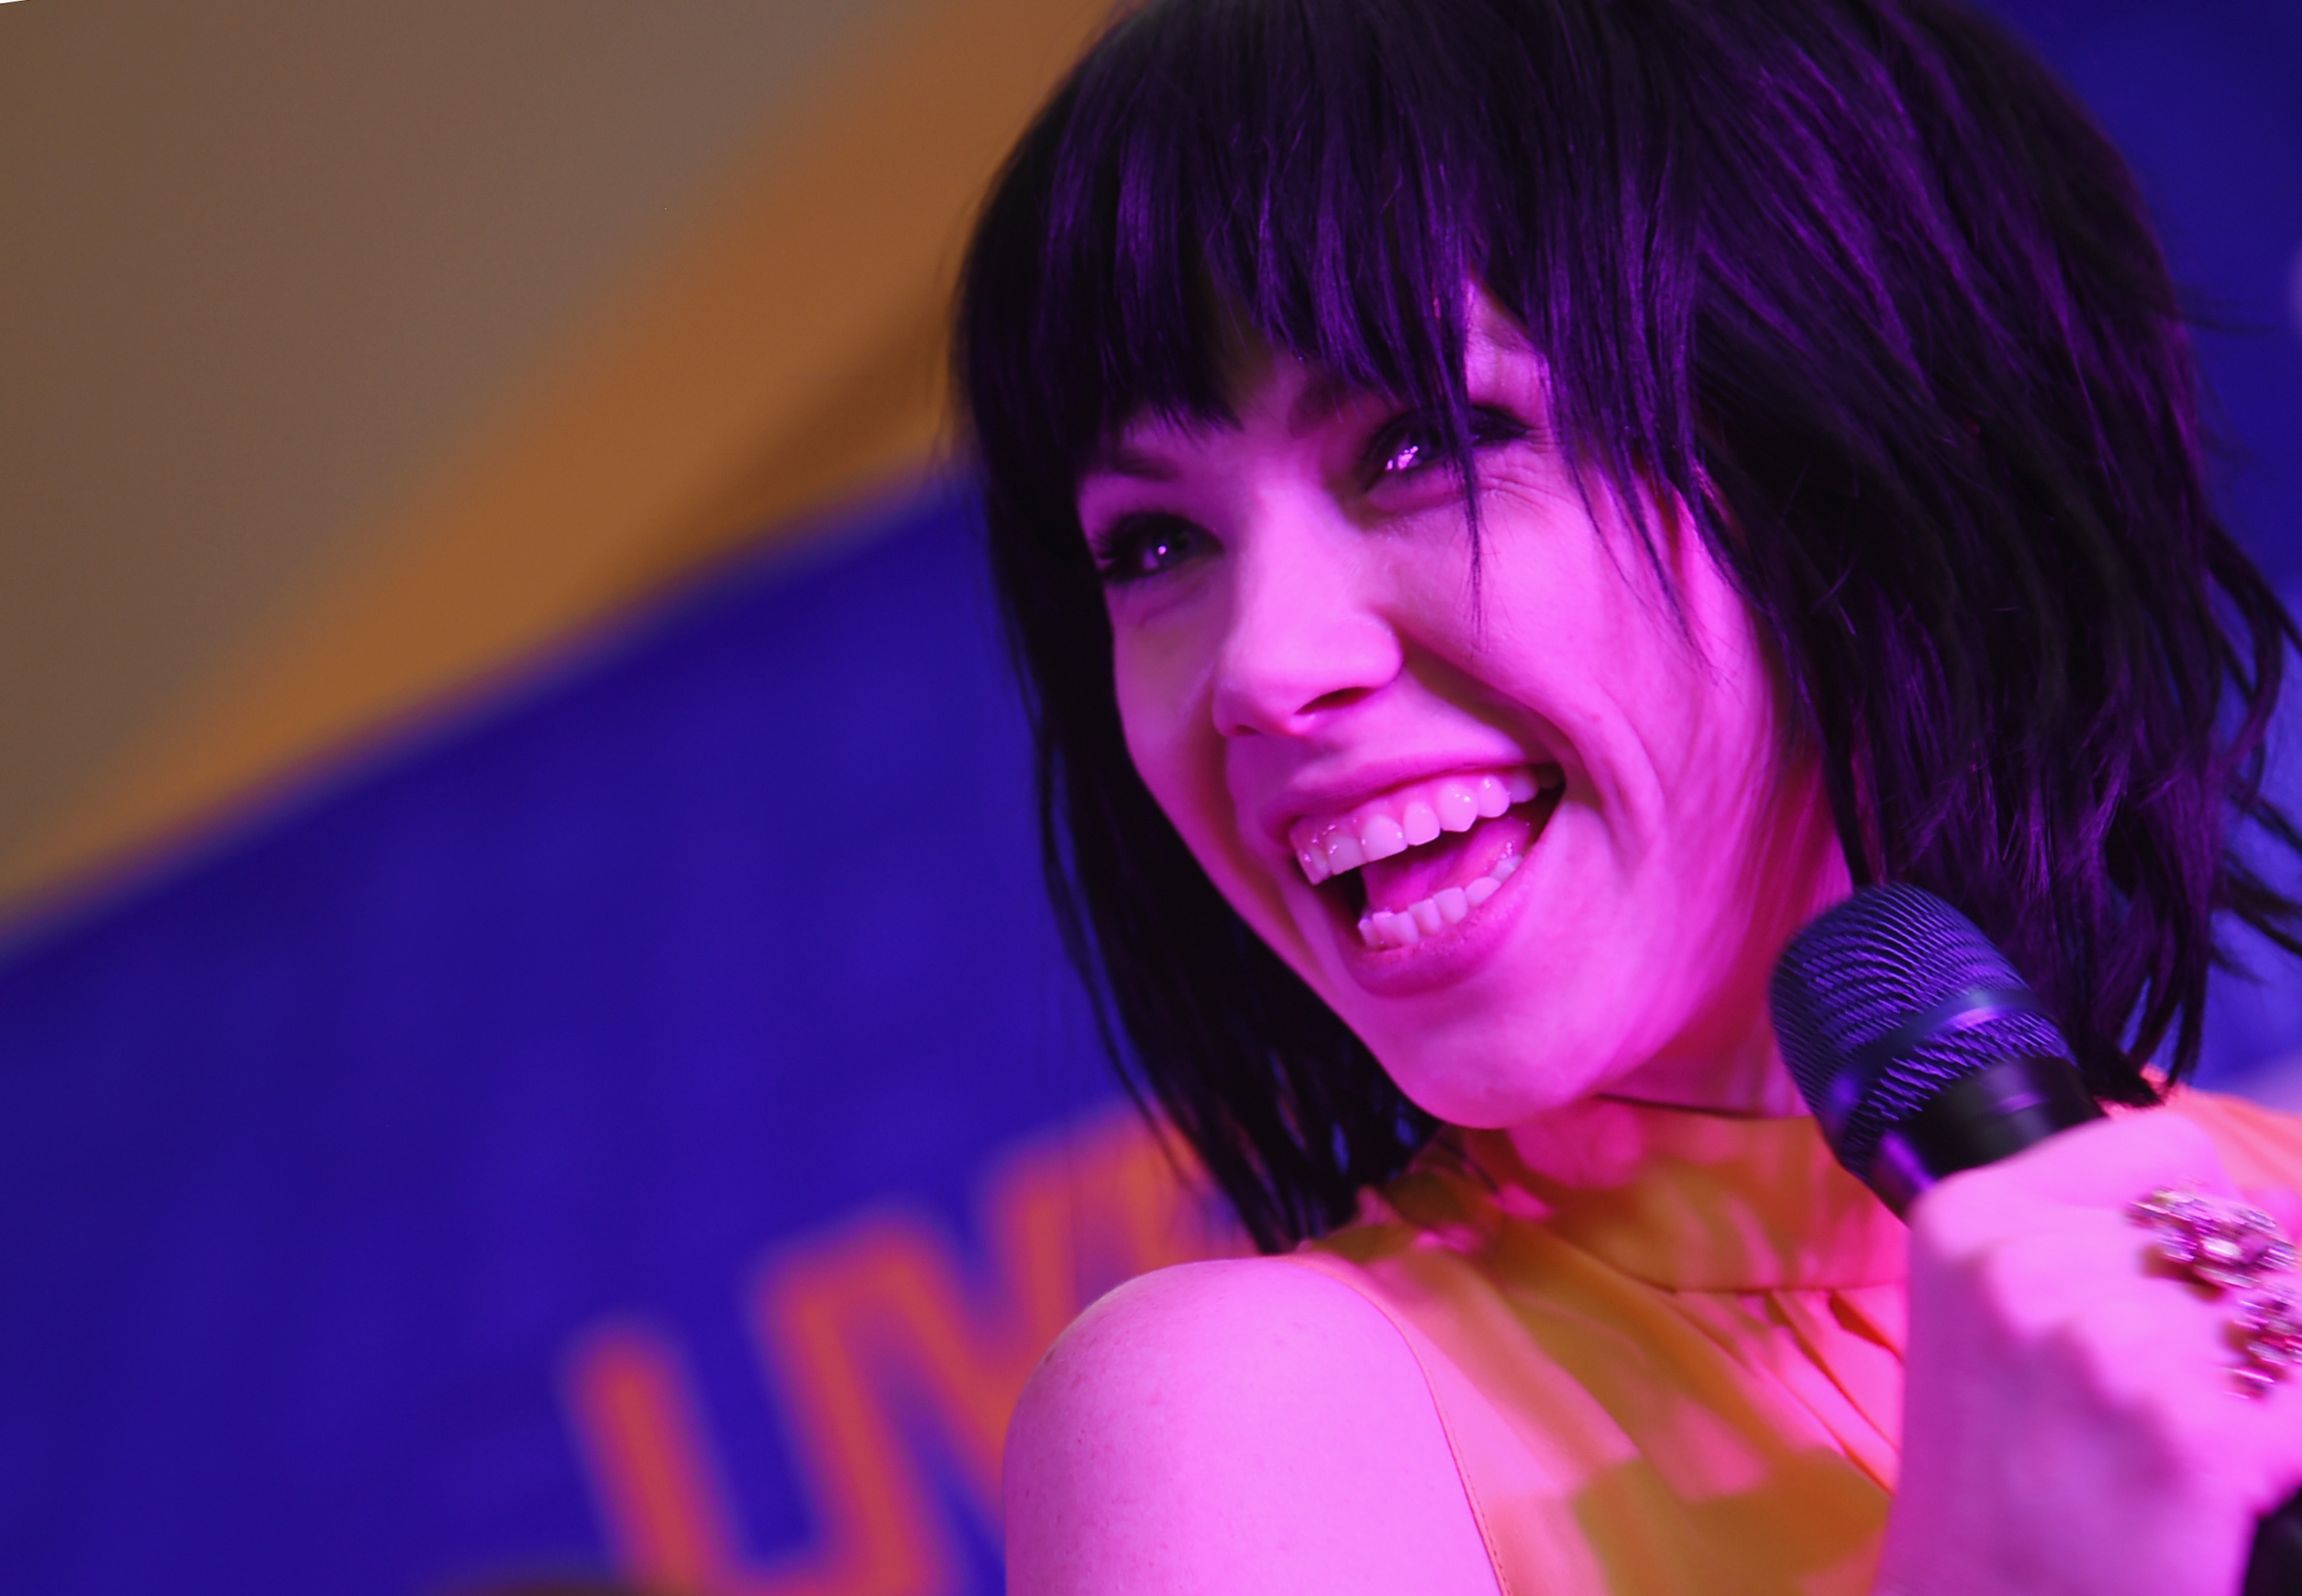 JetBlue's Live From T5 Concert With Carly Rae Jepsen